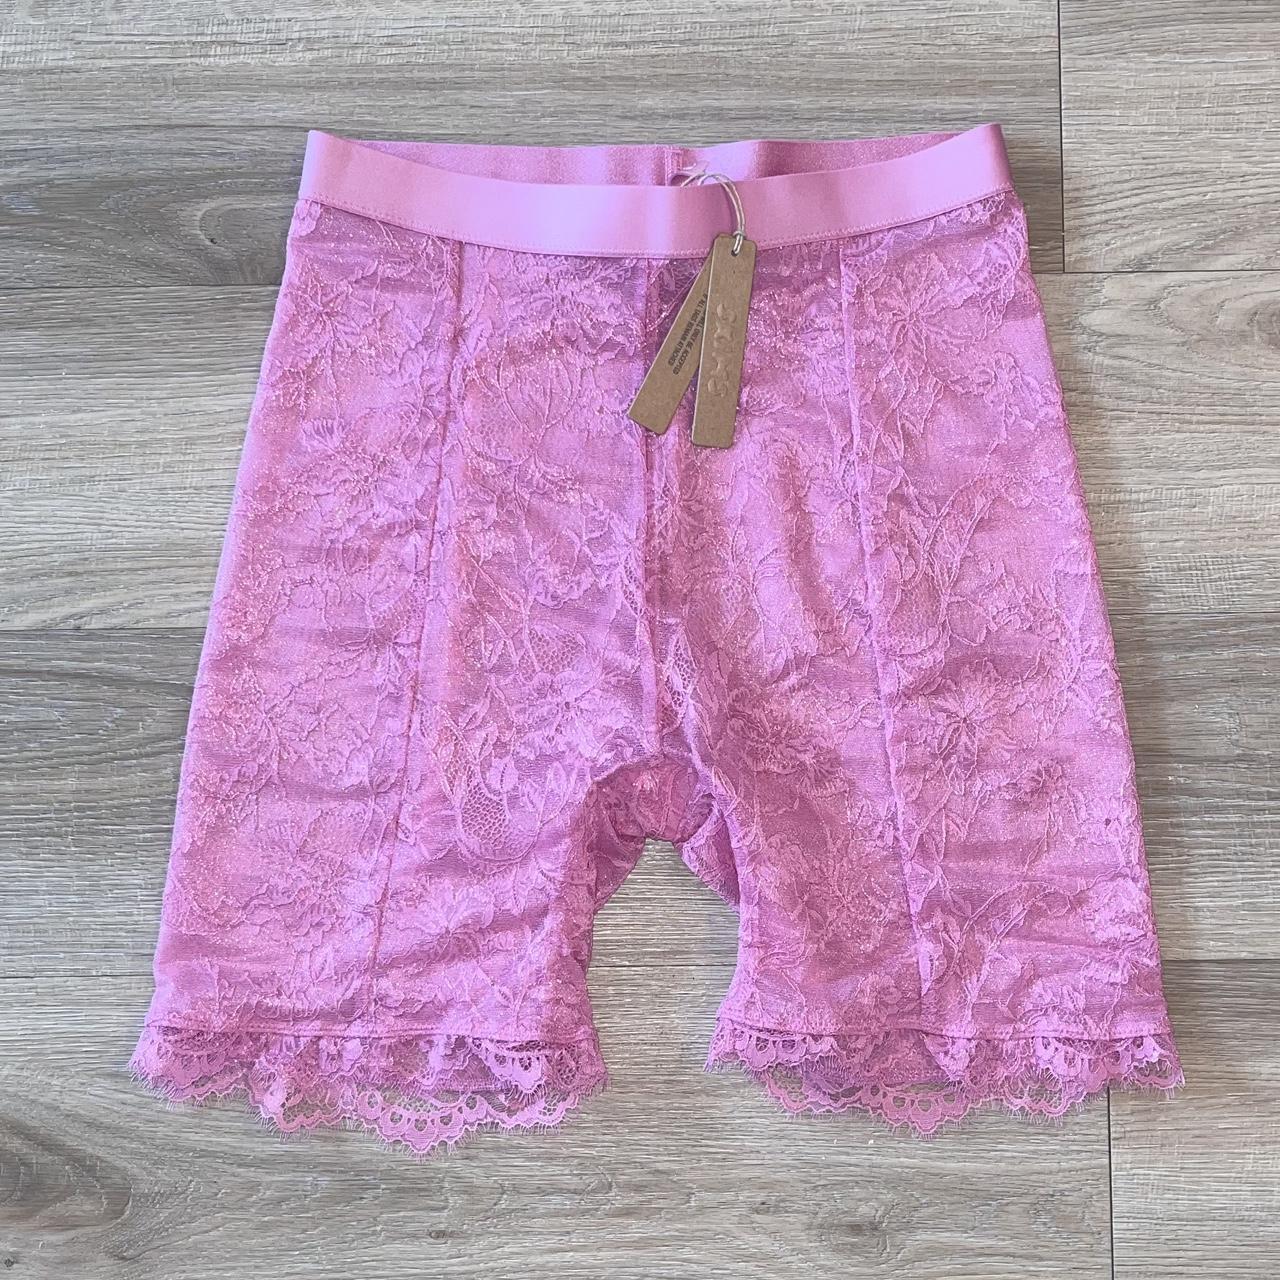 Skims Lace Short in Bubble Gum 💗Size Small 💗Brand - Depop